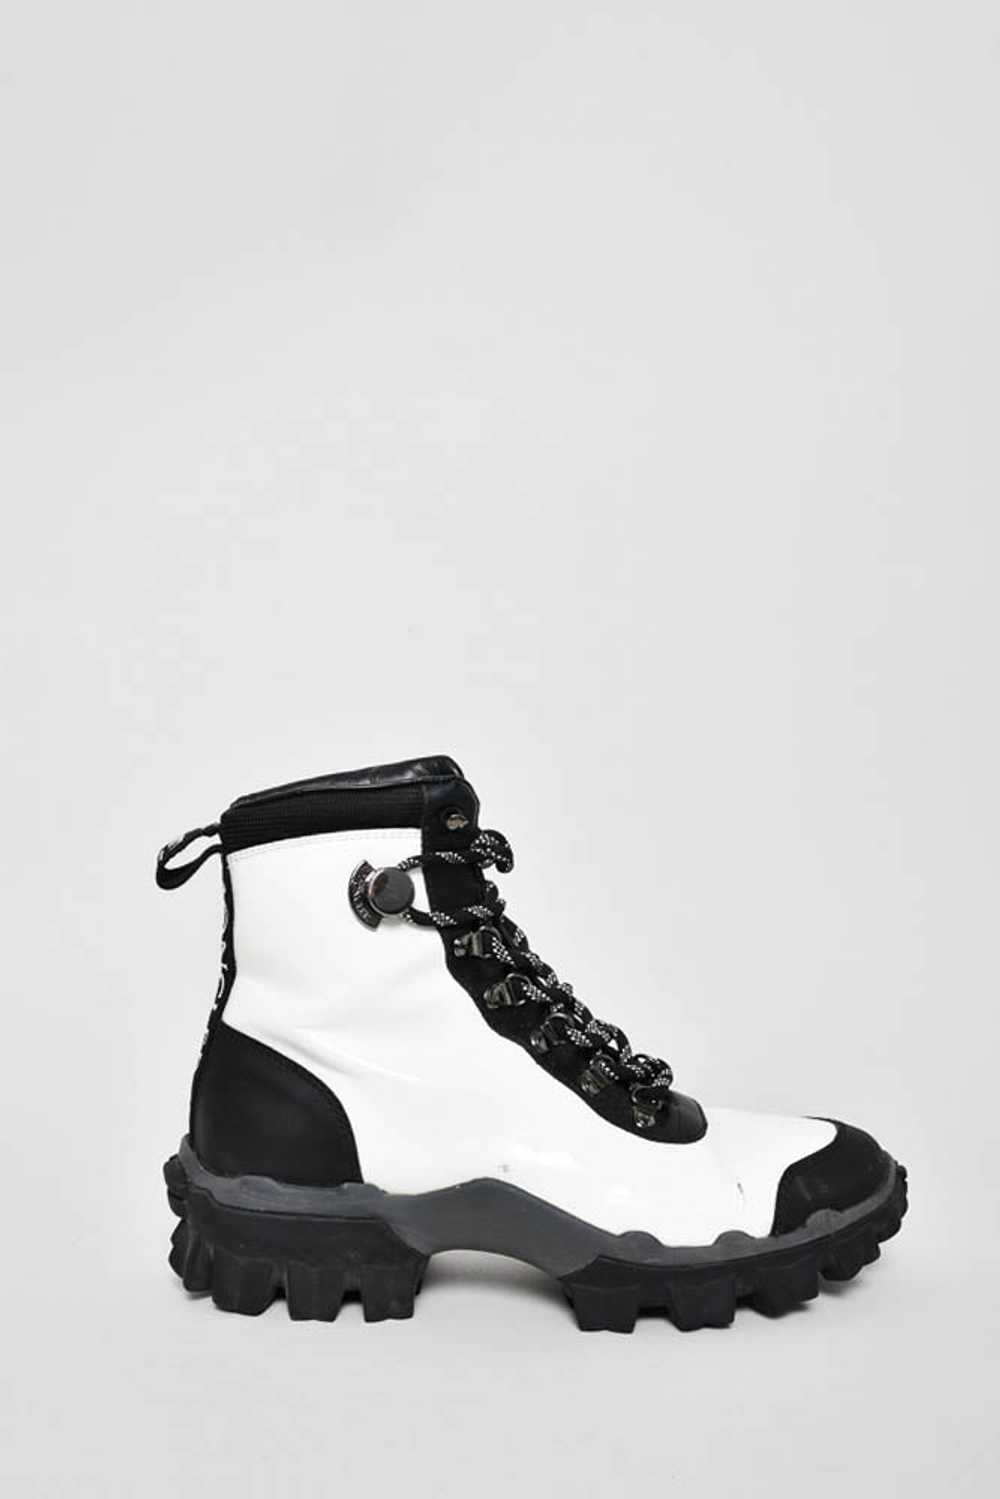 Moncler White Patent/Black Leather Hiking Boots S… - image 1